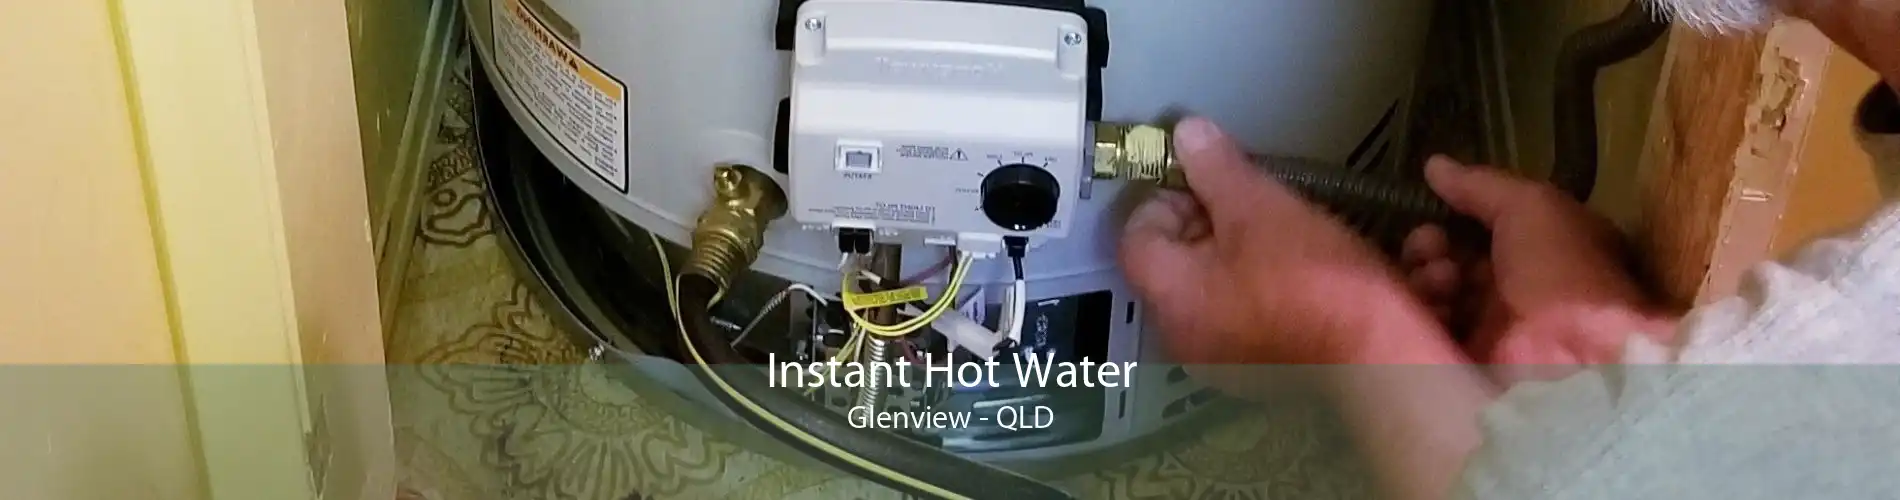 Instant Hot Water Glenview - QLD